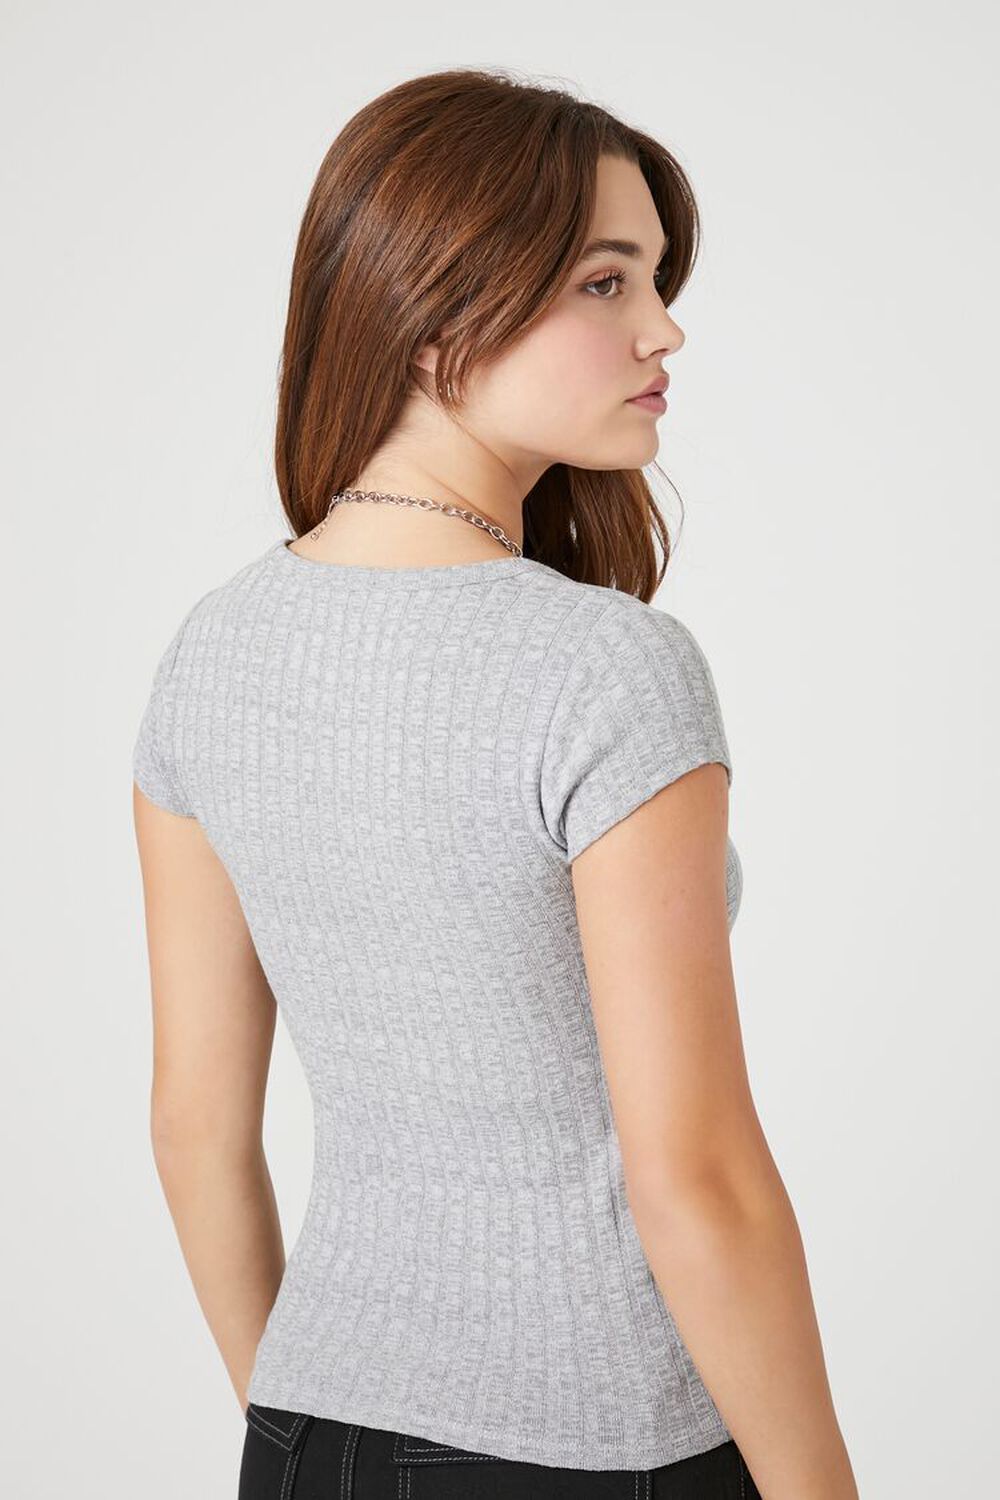 HEATHER GREY Rib-Knit Buttoned Baby Tee, image 3